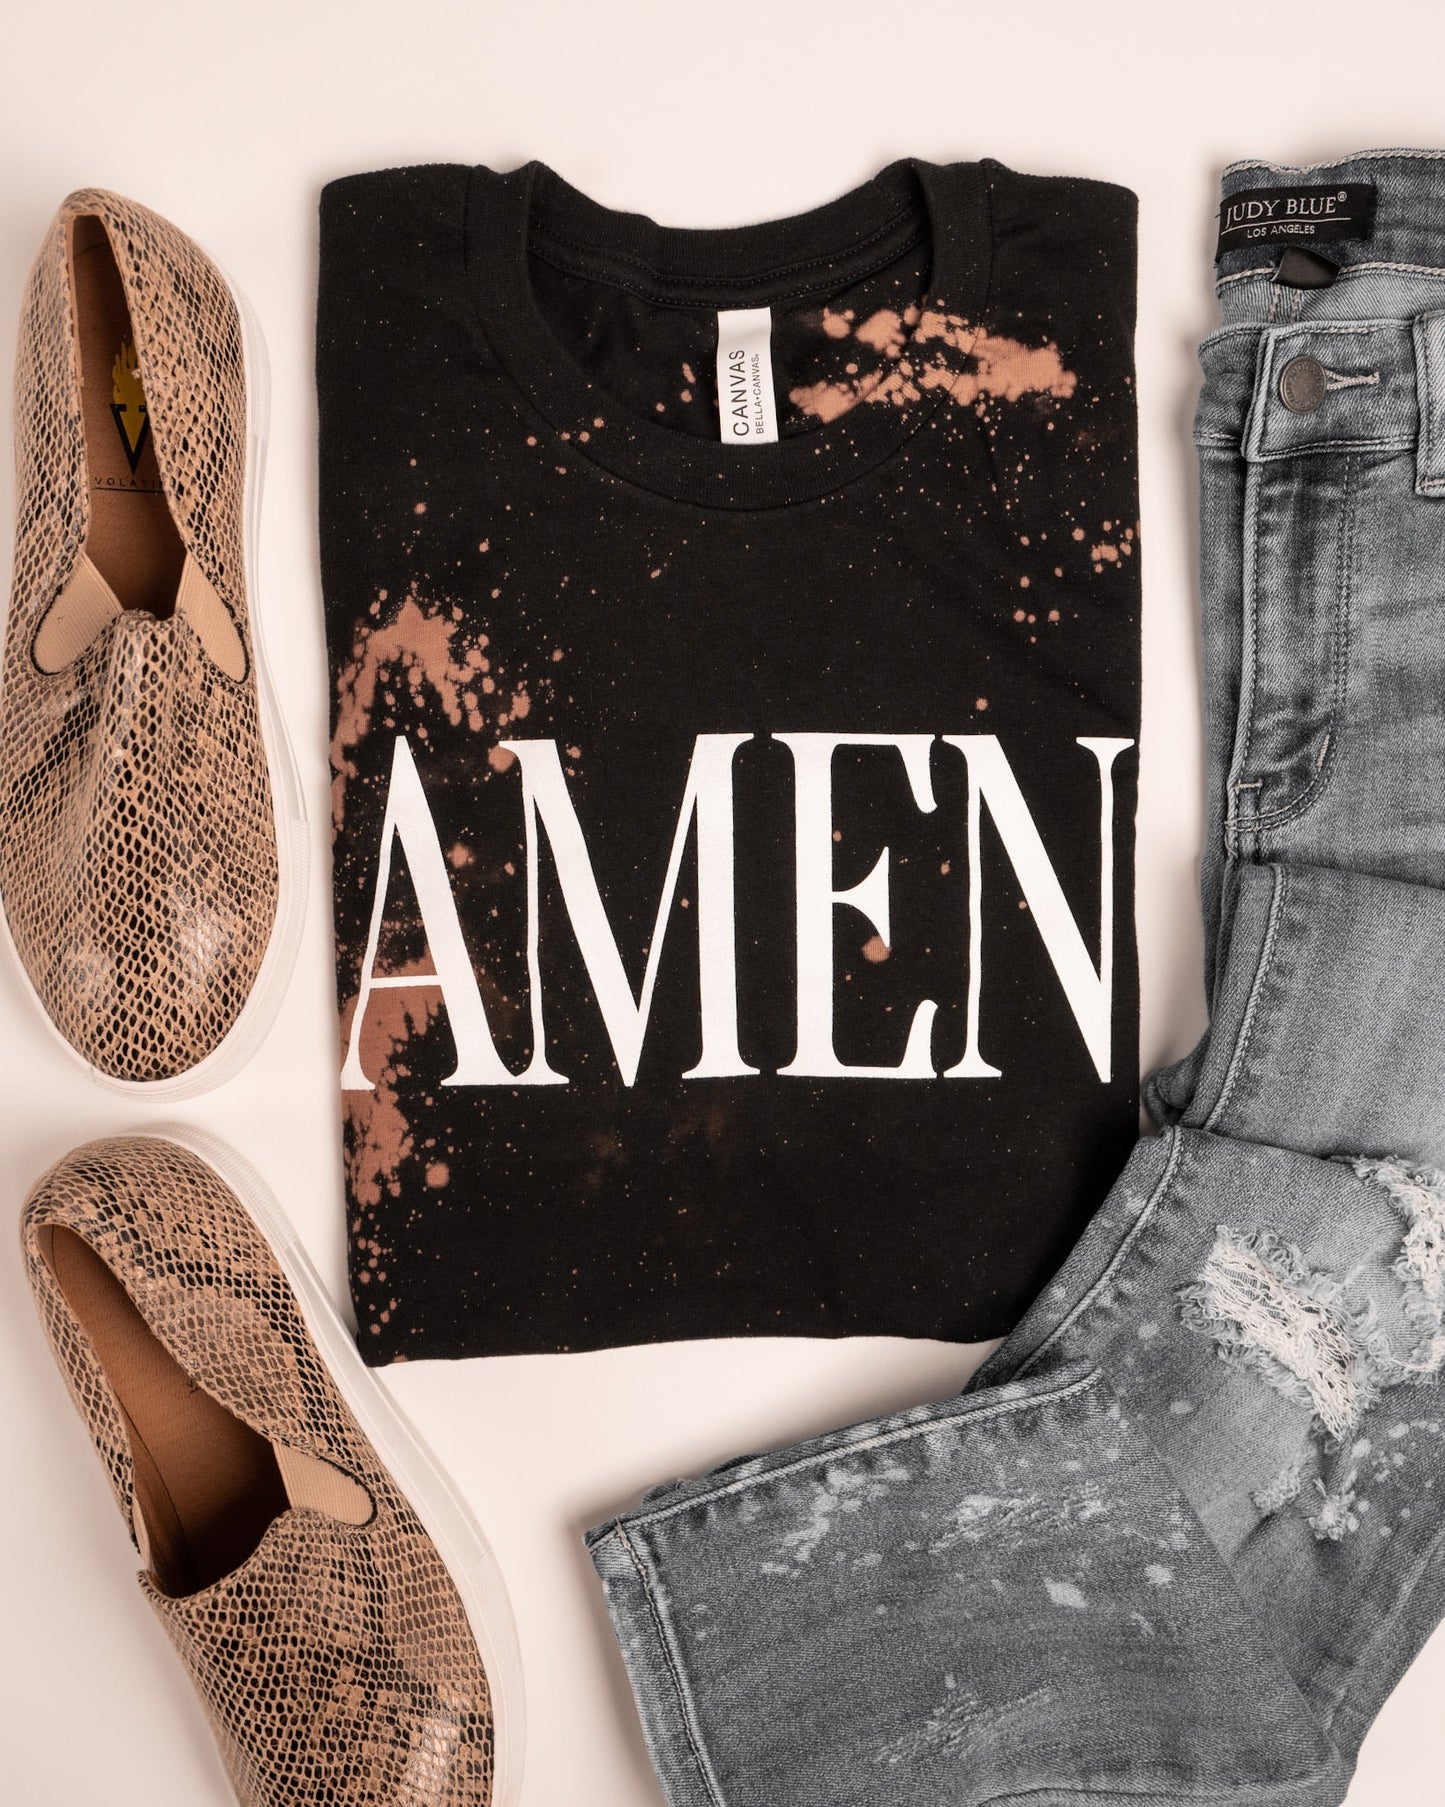 Amen Bleached Graphic Tee